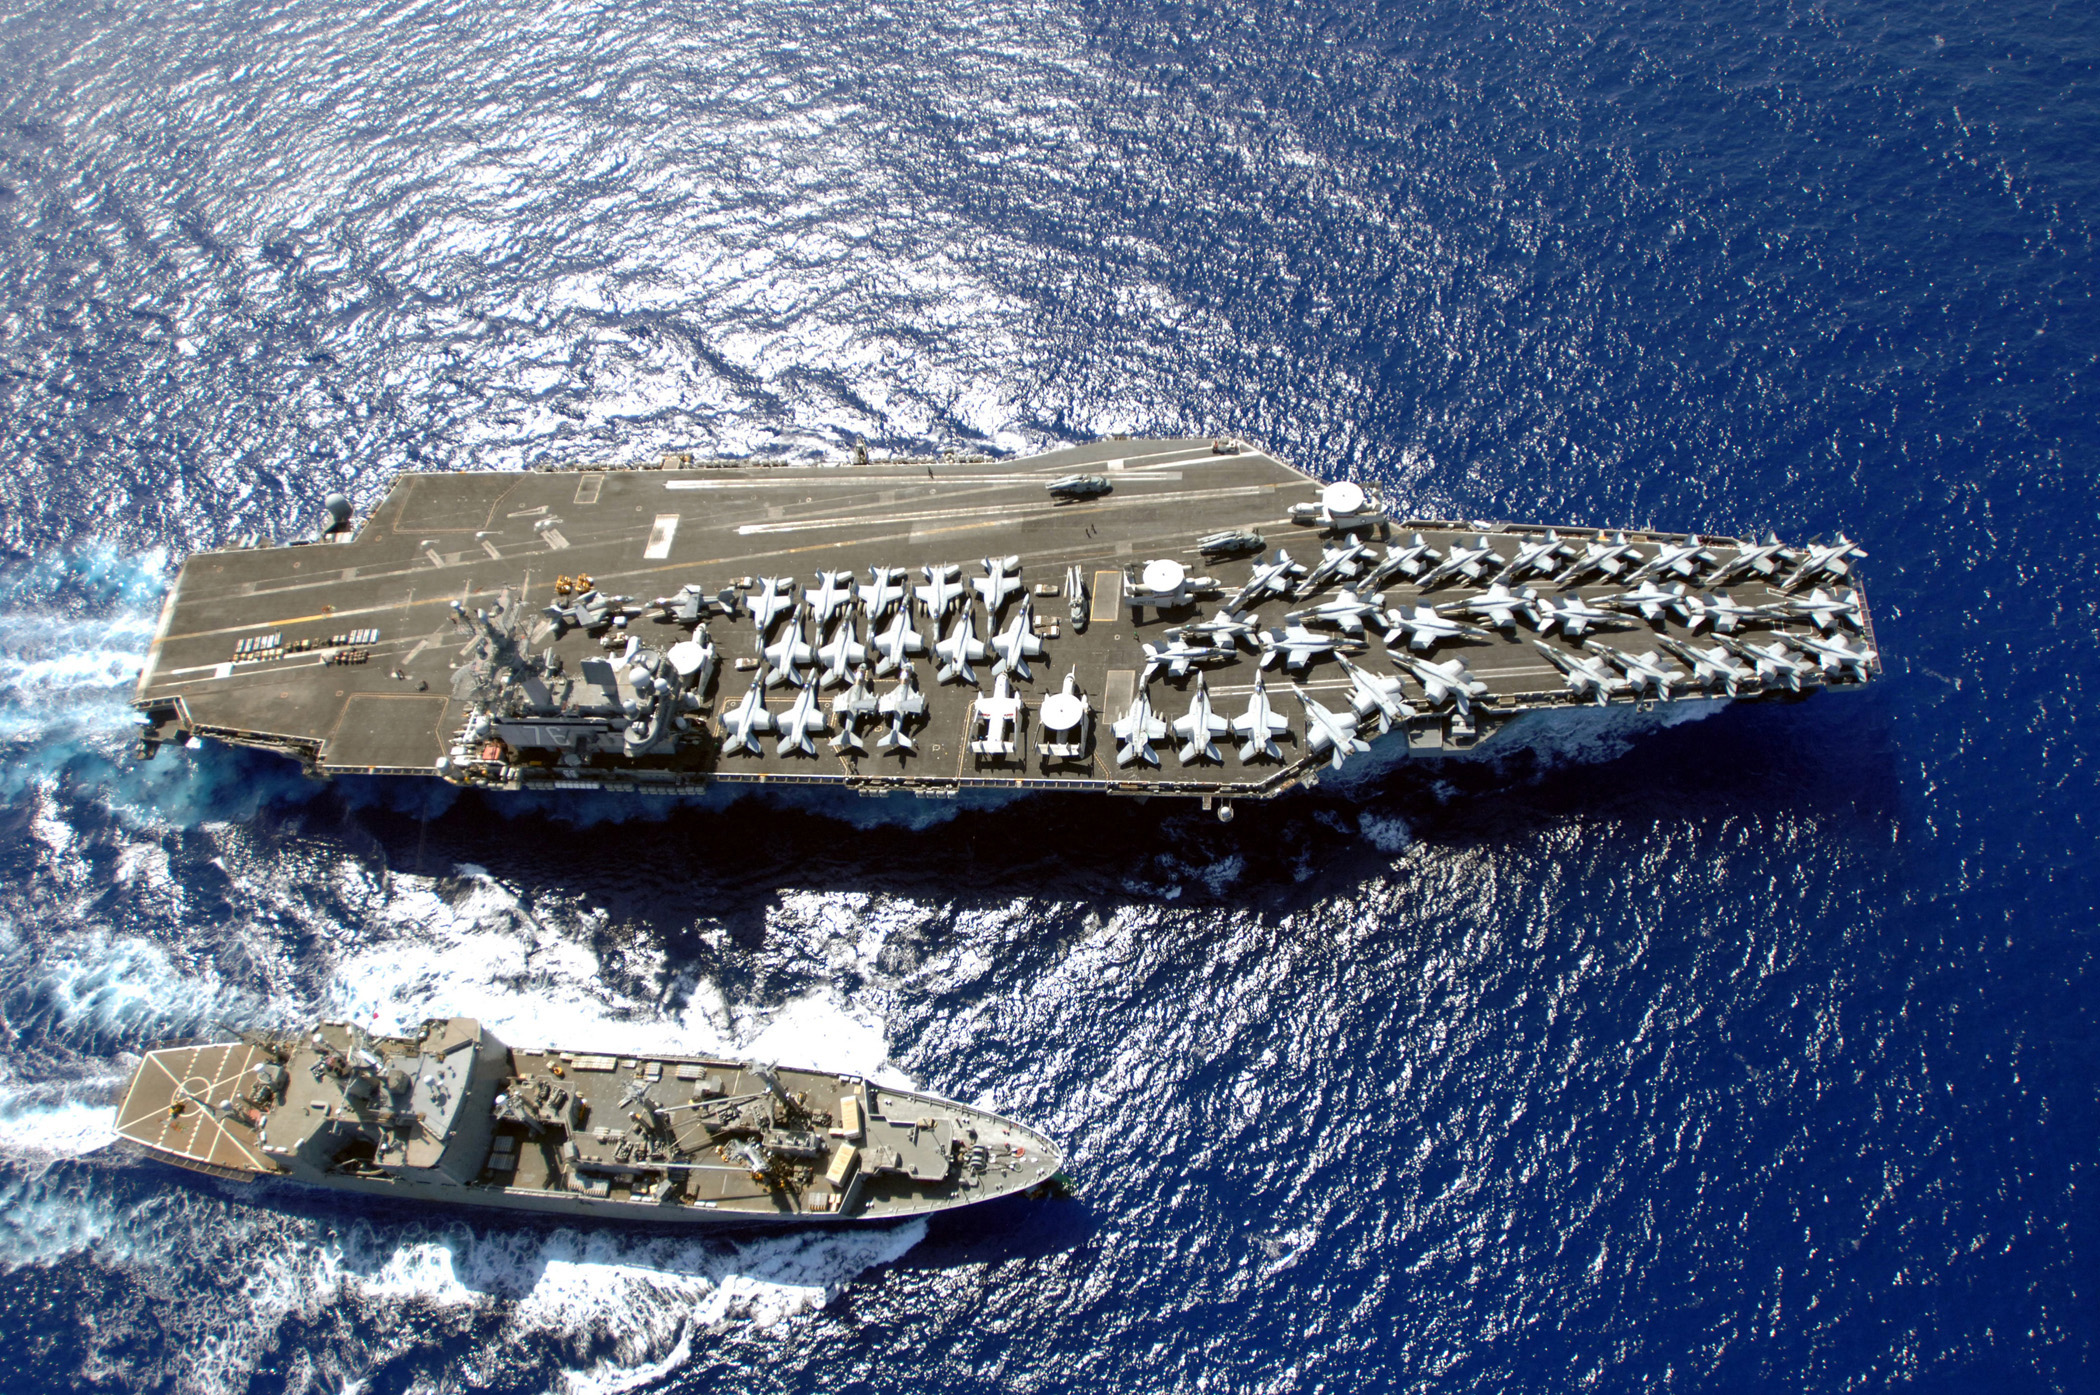 US Navy carrier full of planes on deck